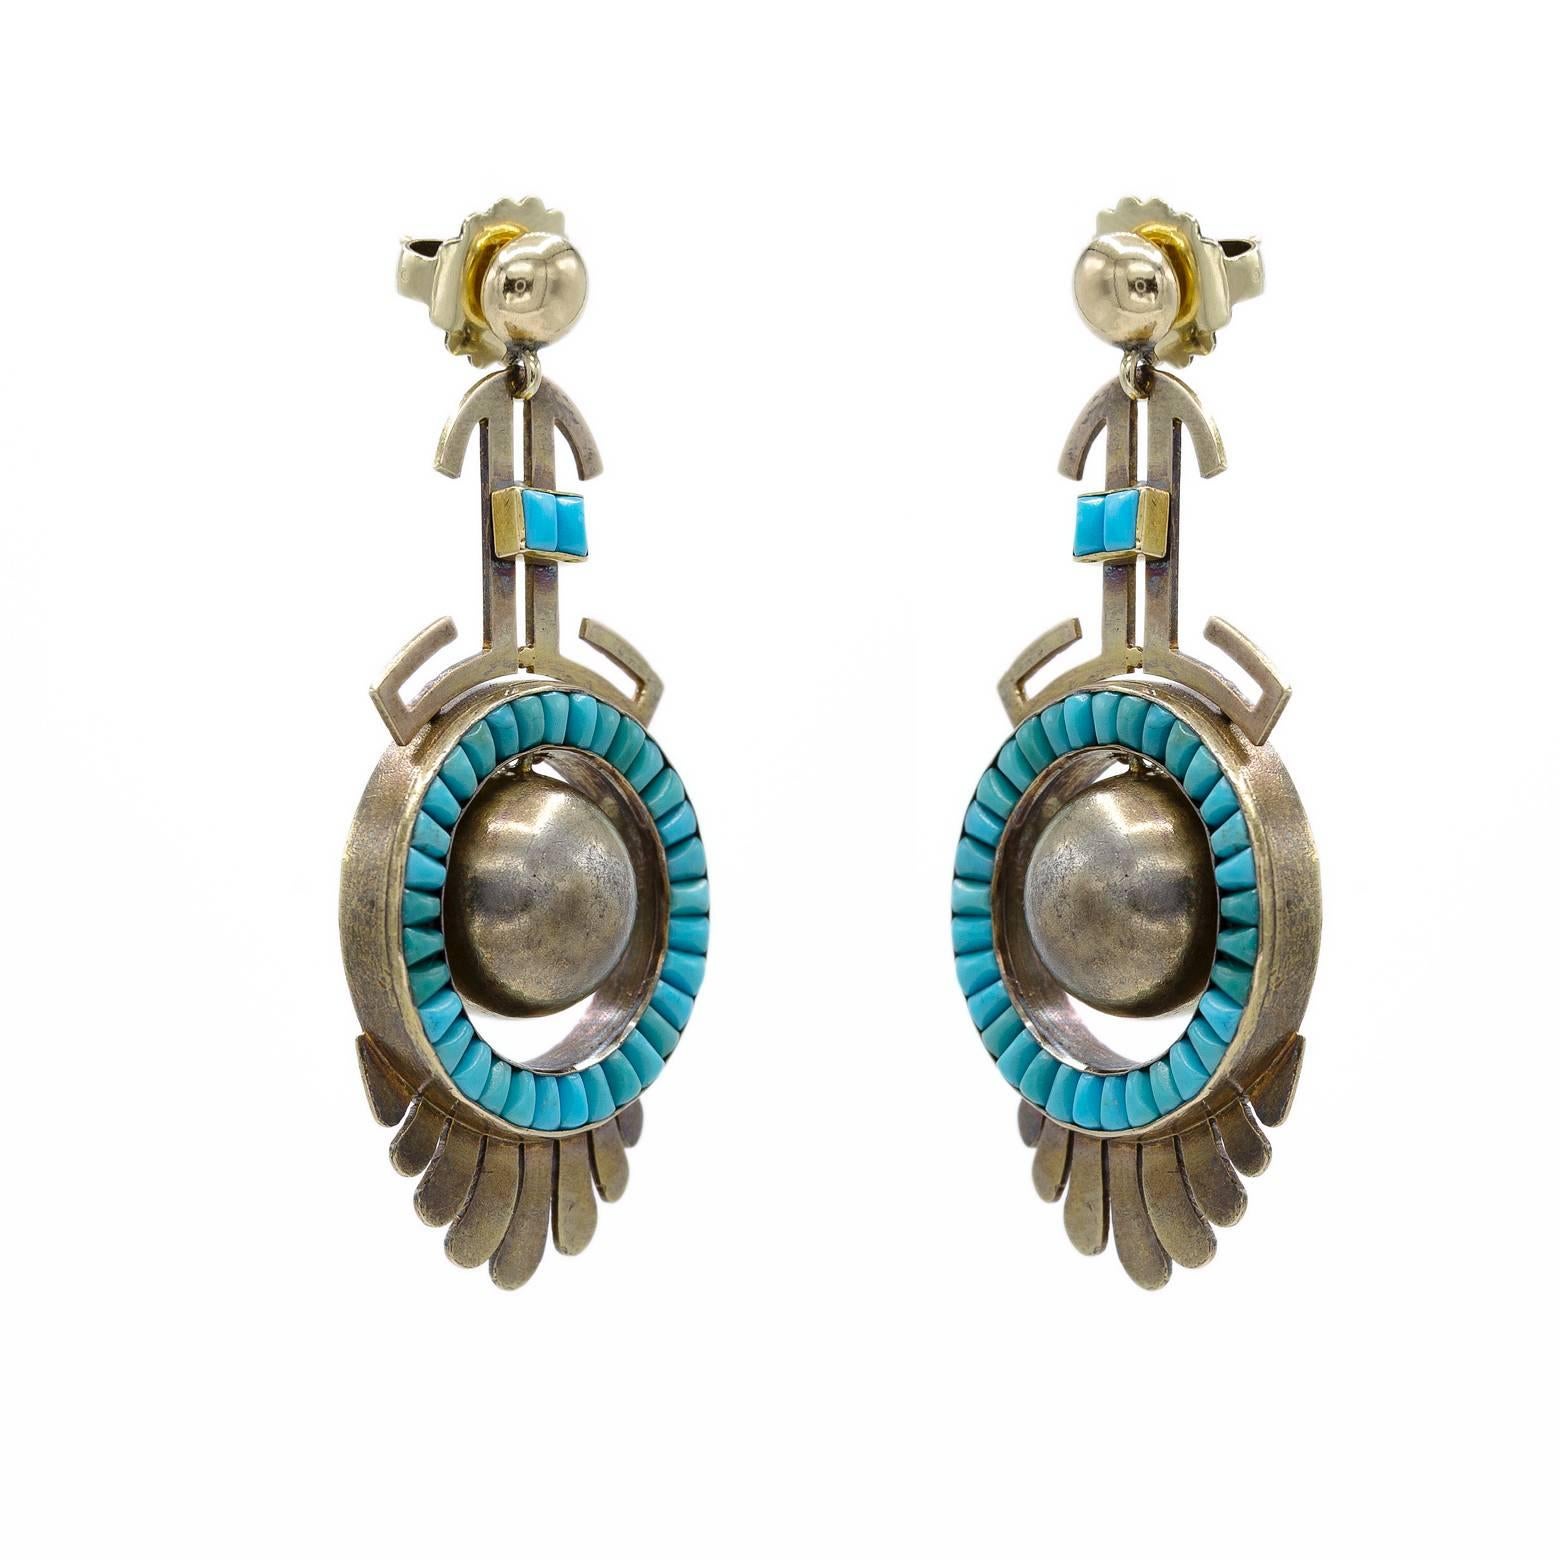 These unique gold and turquoise earrings dance from the gold posts in abstract images as if from the deep desert. The movement swings and the spheres sway giving these artsy earrings freedom to express the hand work of the many inlaid turquoise